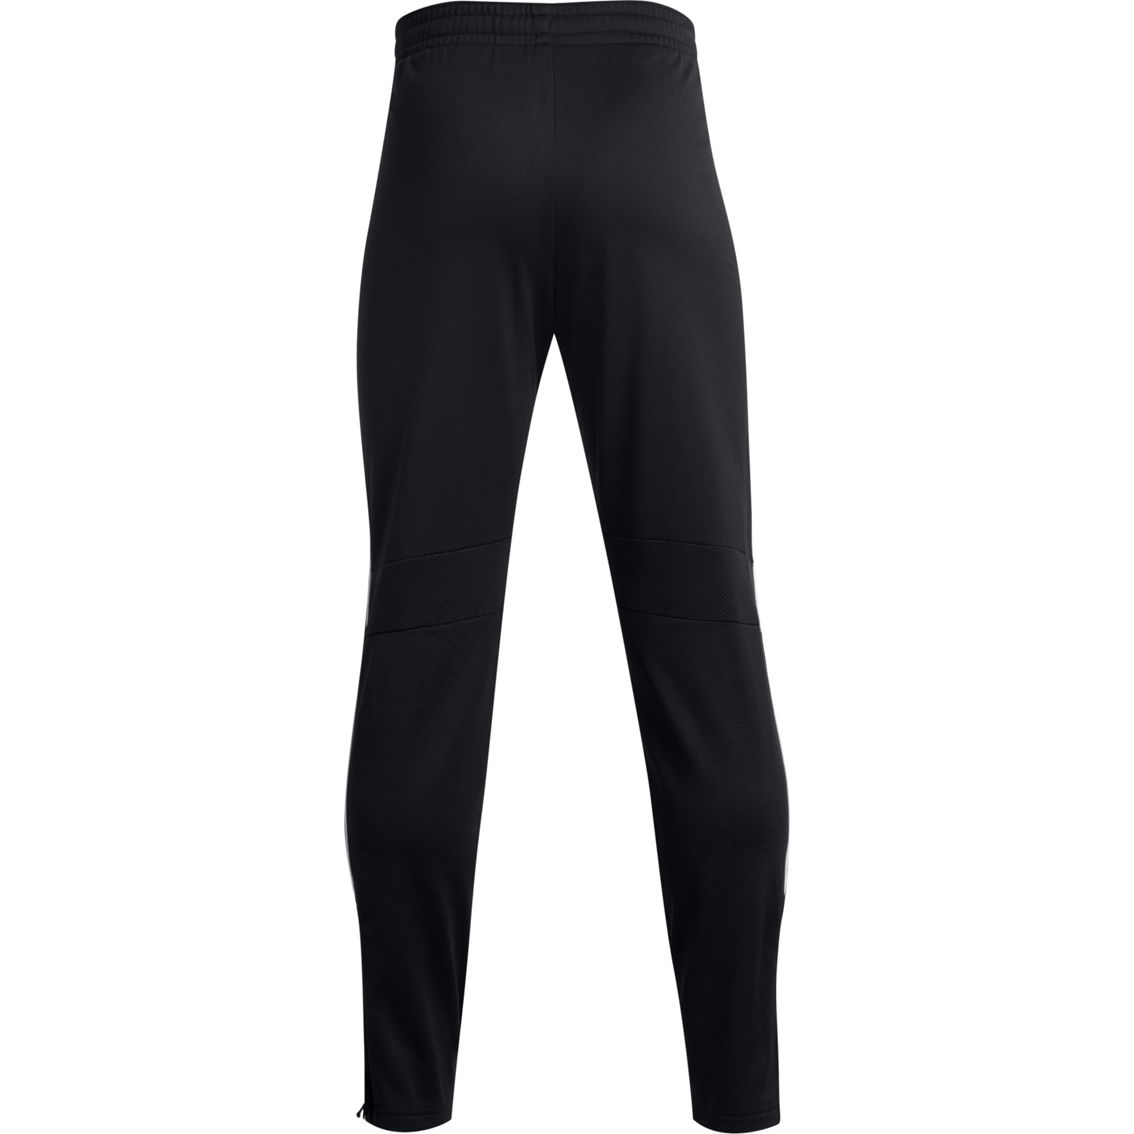 Under Armour Boys Pennant 2.0 Pants - Image 2 of 2